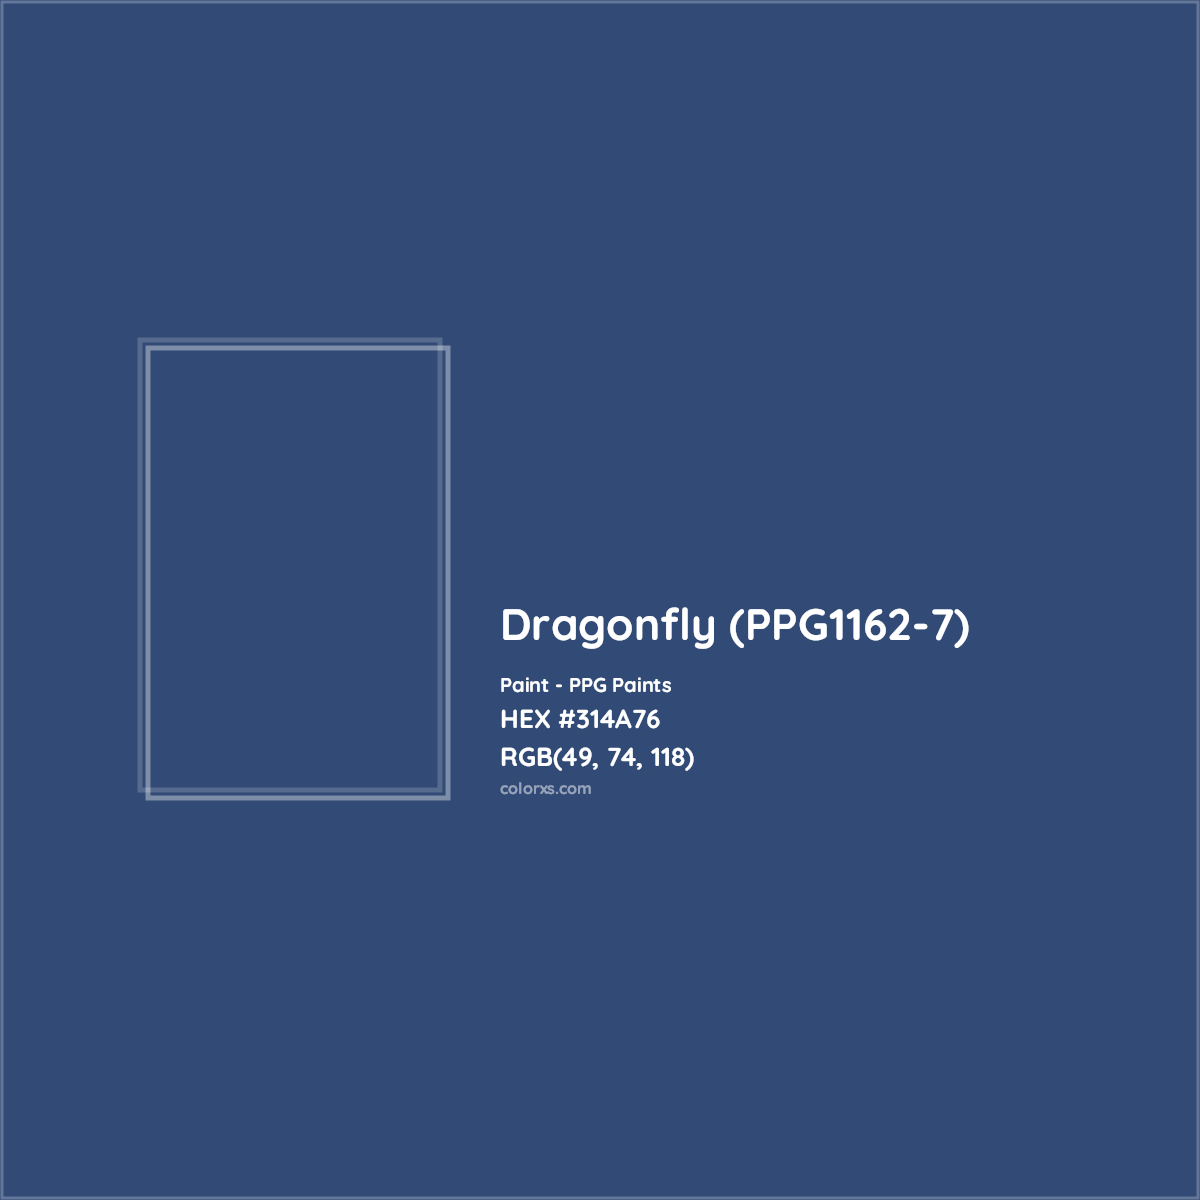 HEX #314A76 Dragonfly (PPG1162-7) Paint PPG Paints - Color Code